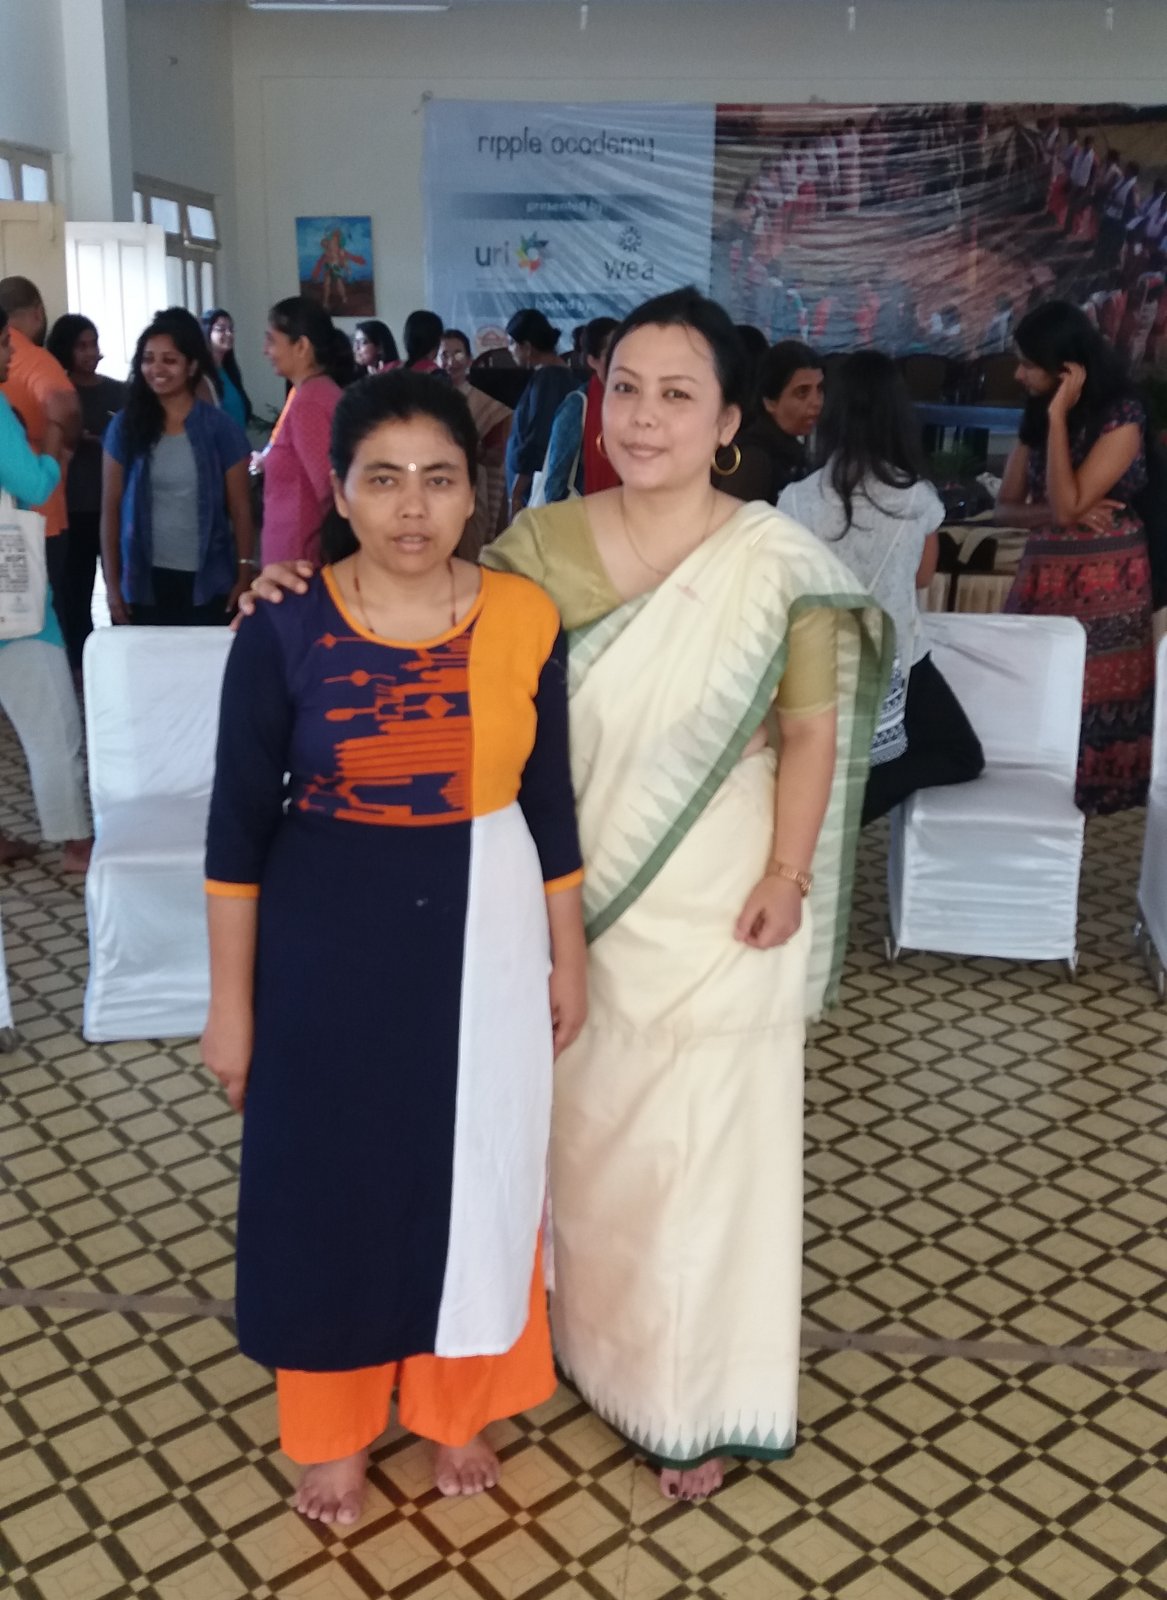 With Anitha Shrestha from Nepal who works on environment and indigeneous women. She is now a World Pulse community member and an active blogger in this space sharing her work and vision.